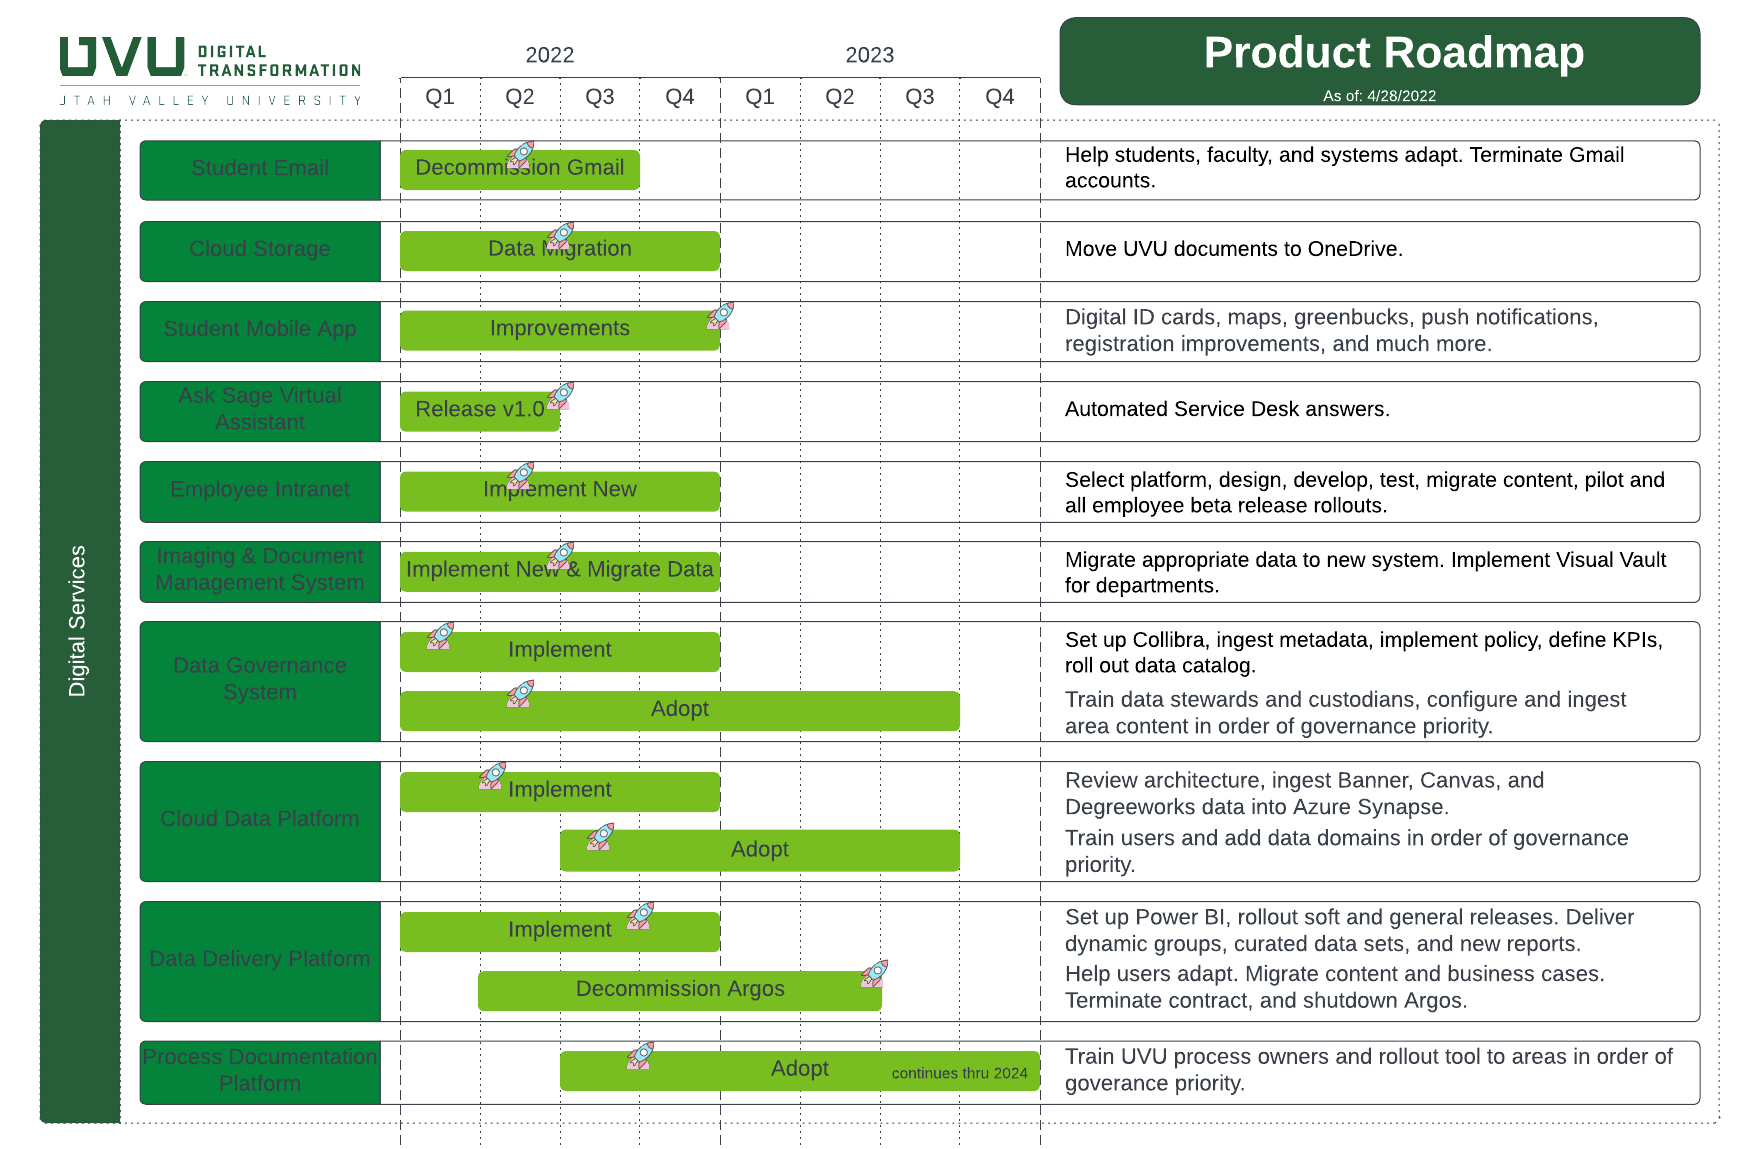 The Digital Services Product Roadmap shows our plans and progress on specific projects, including Student Email, Cloud Storage, the Student Mobile App, Ask Sage, the Virtual Assistant, the Employee Intranet, the Imaging & Document Management System, the Data Governance System, the Cloud Data Platform, the Data Delivery Platform, and the Process Documentation Platform. 